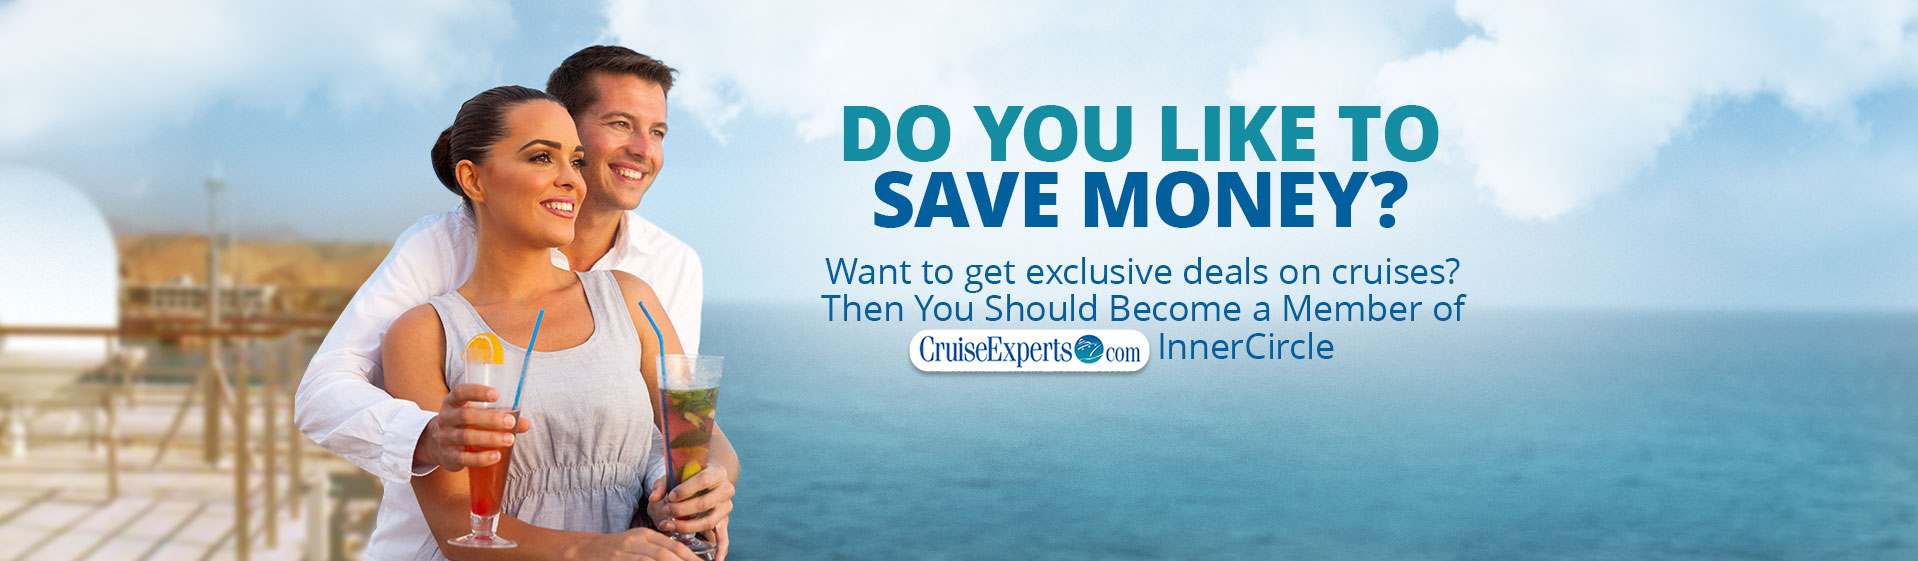 InnerCircle - Save money and join today!